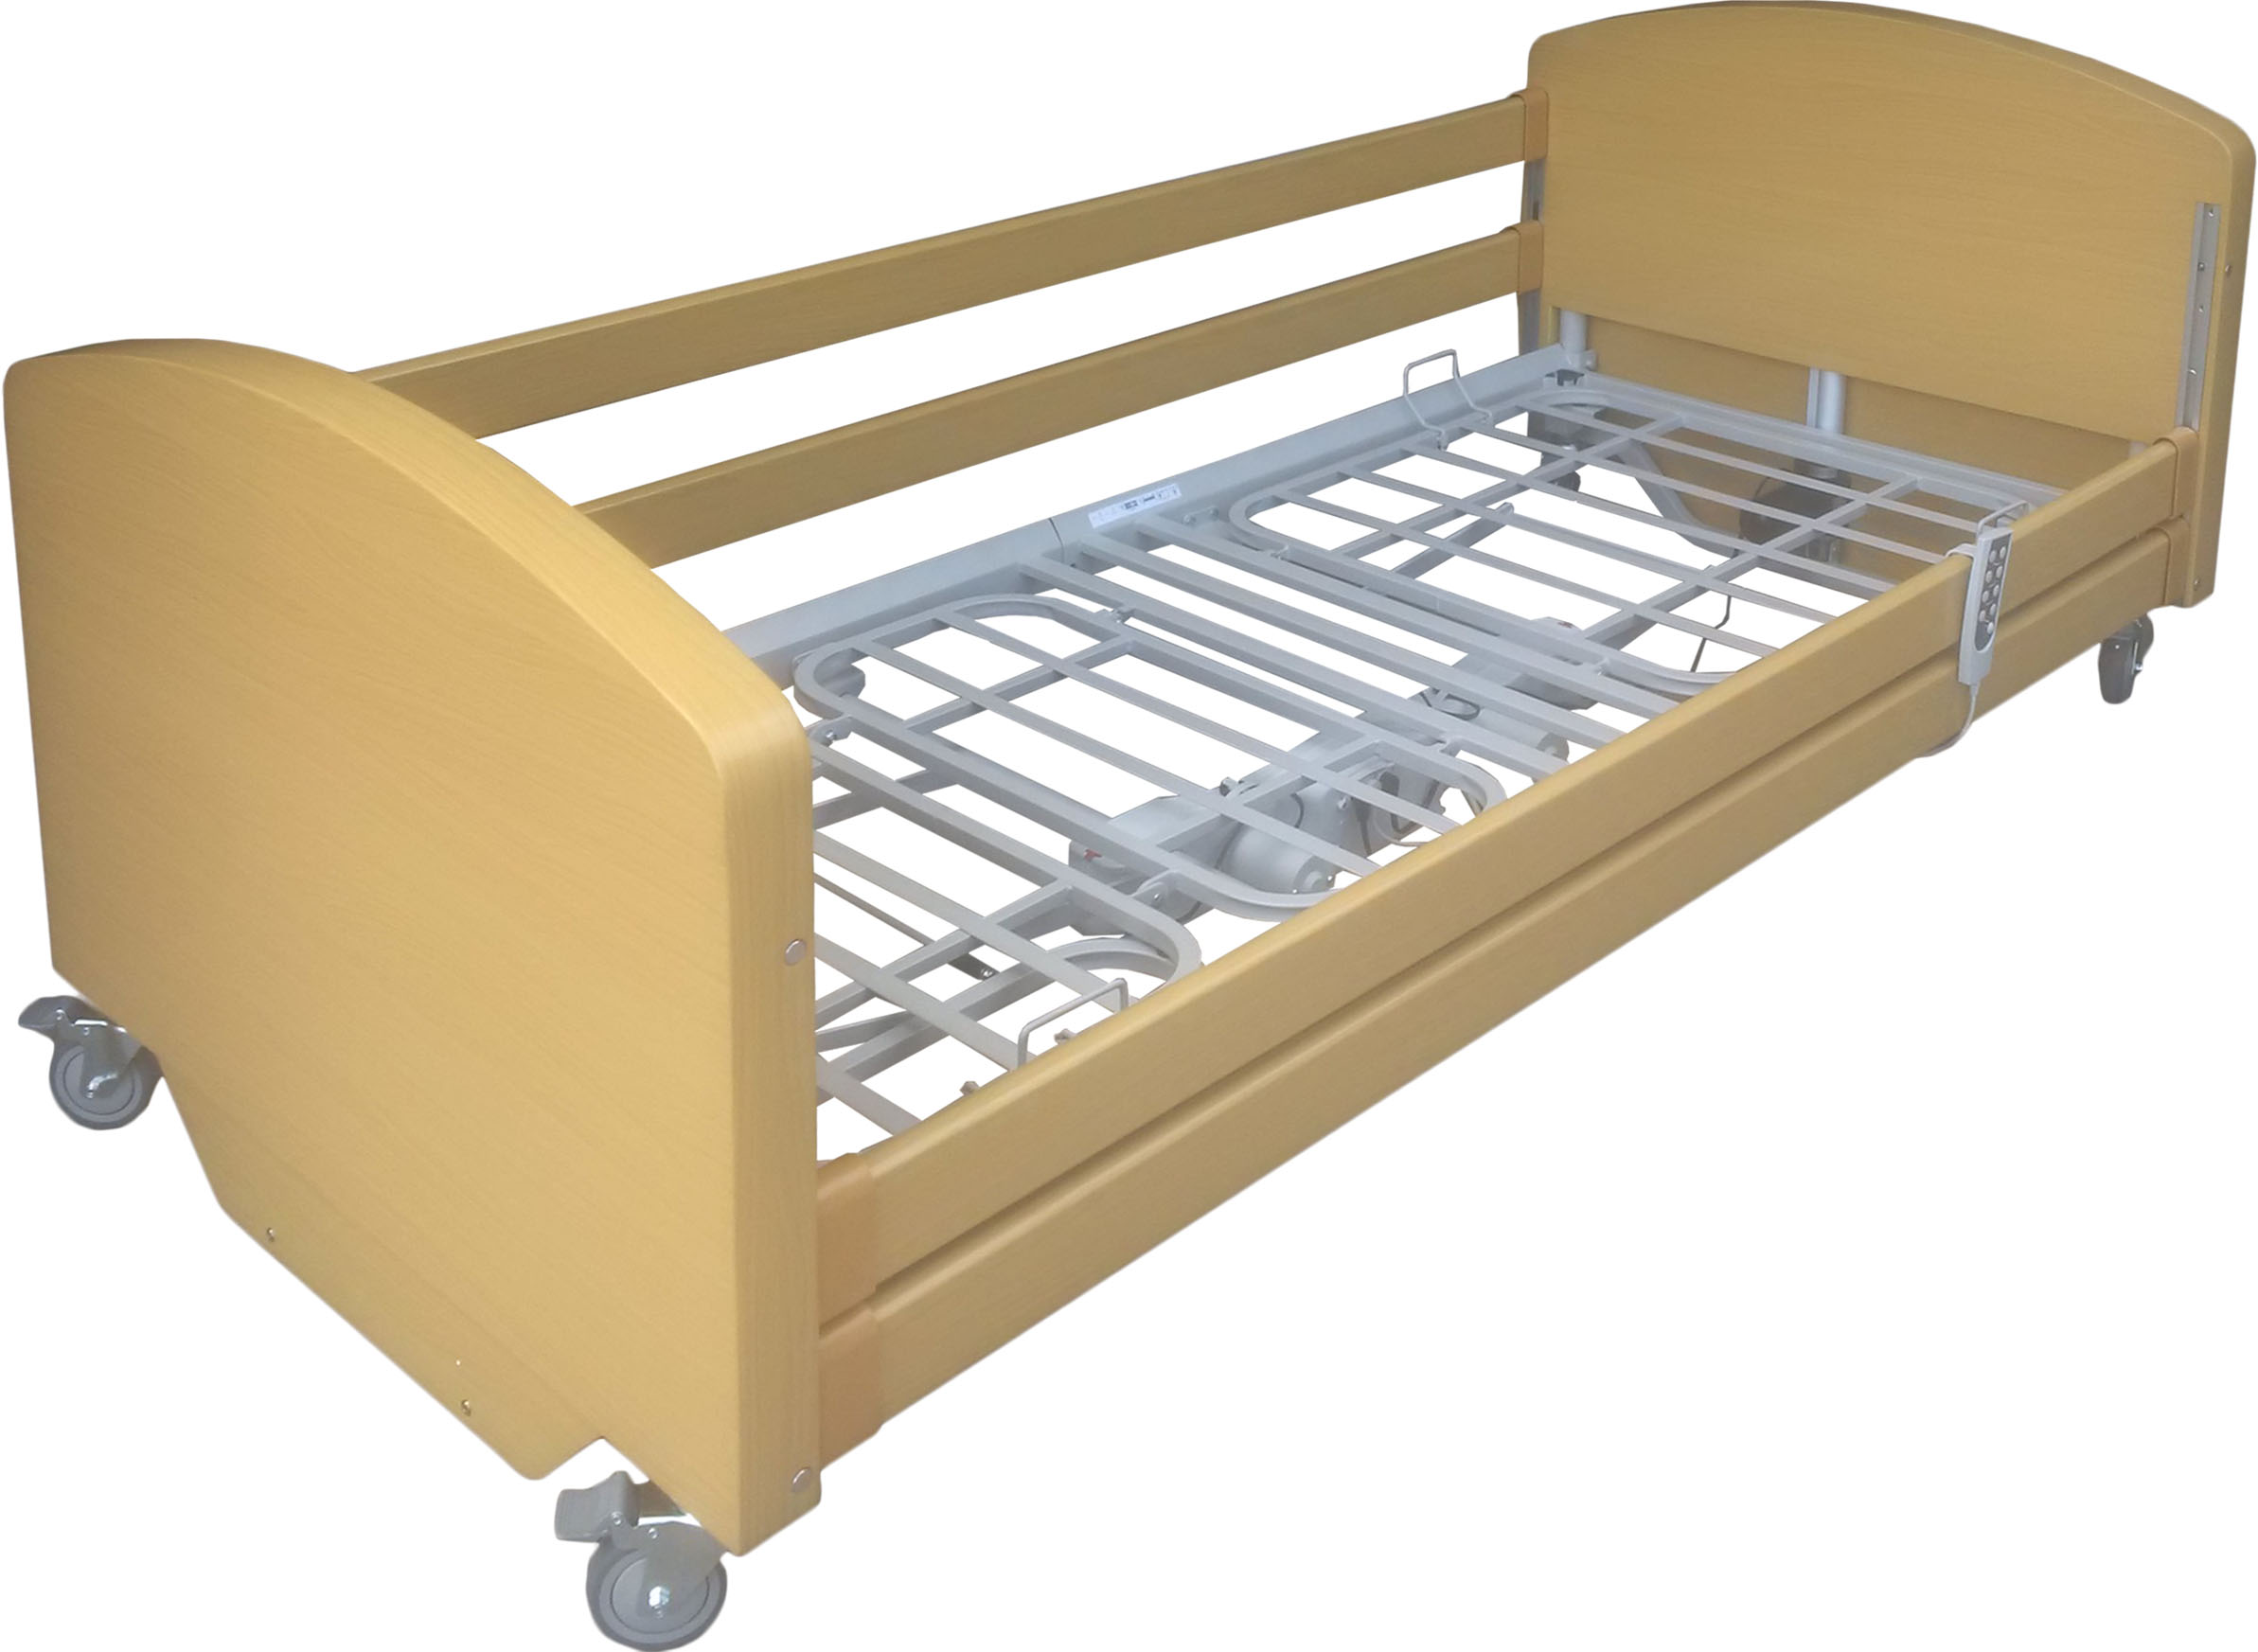 Electra Profile Bed